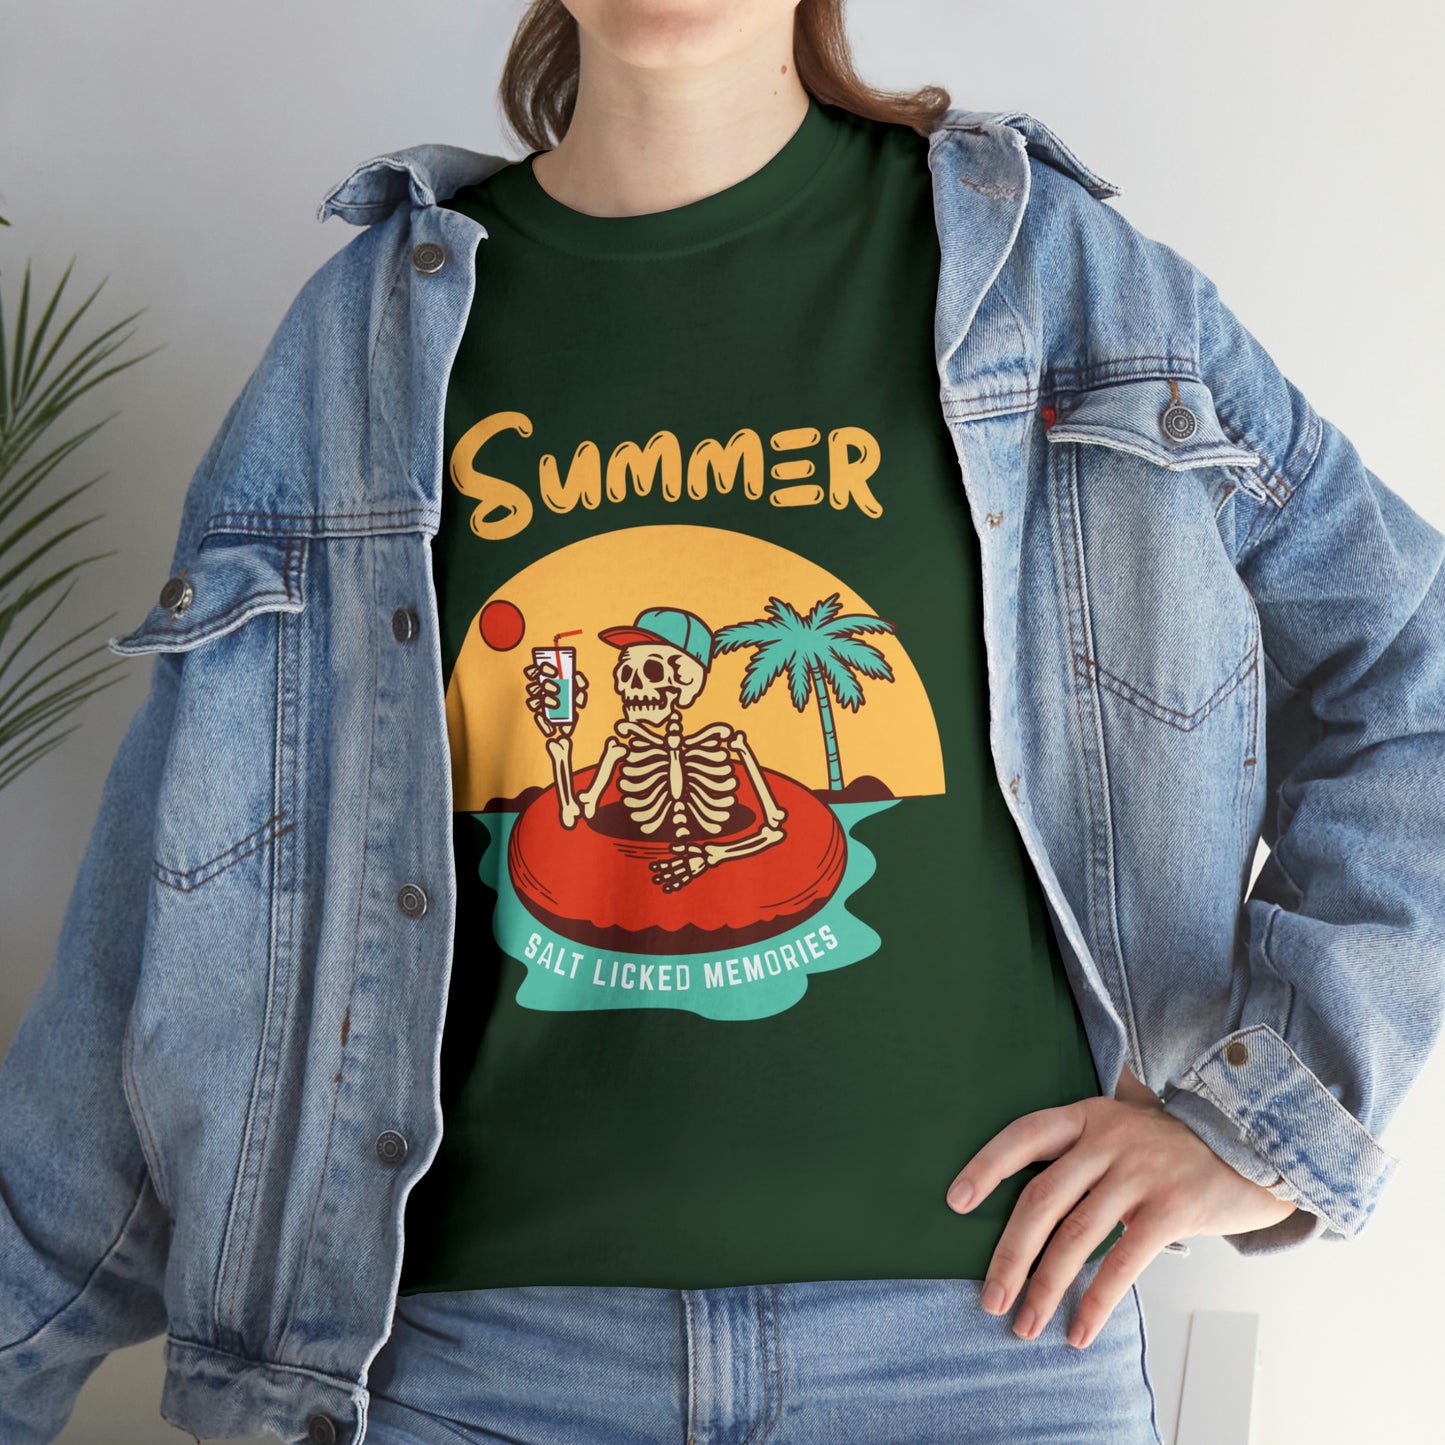 Summer Your Style Our Custom Printed Tee Unique Design Comfortable Fit Personalized for You color, funny tshirt tee shirt motivation